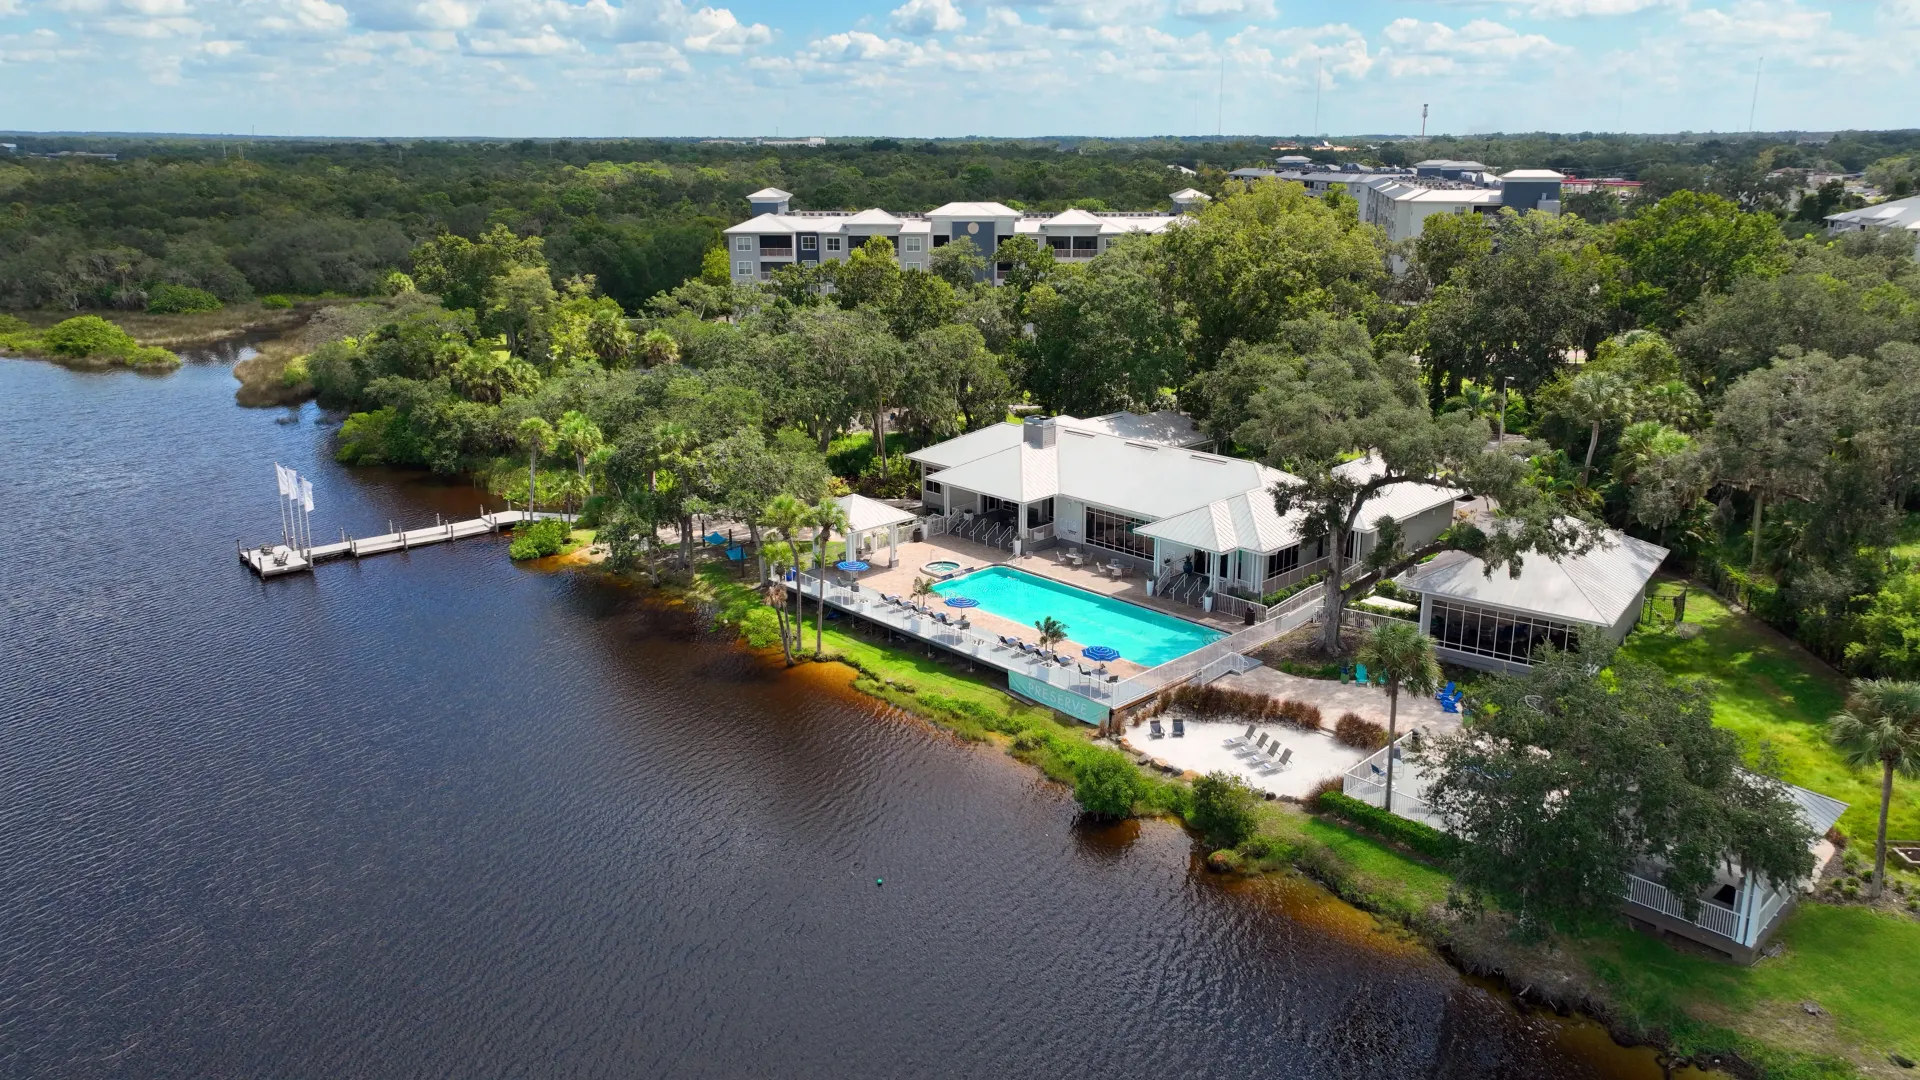 A drone shot capturing the riverside community, showcasing a shimmering pool, clubhouse, fitness center, and all the incredible outdoor amenities surrounded by natural landscapes and endless outdoor adventures.